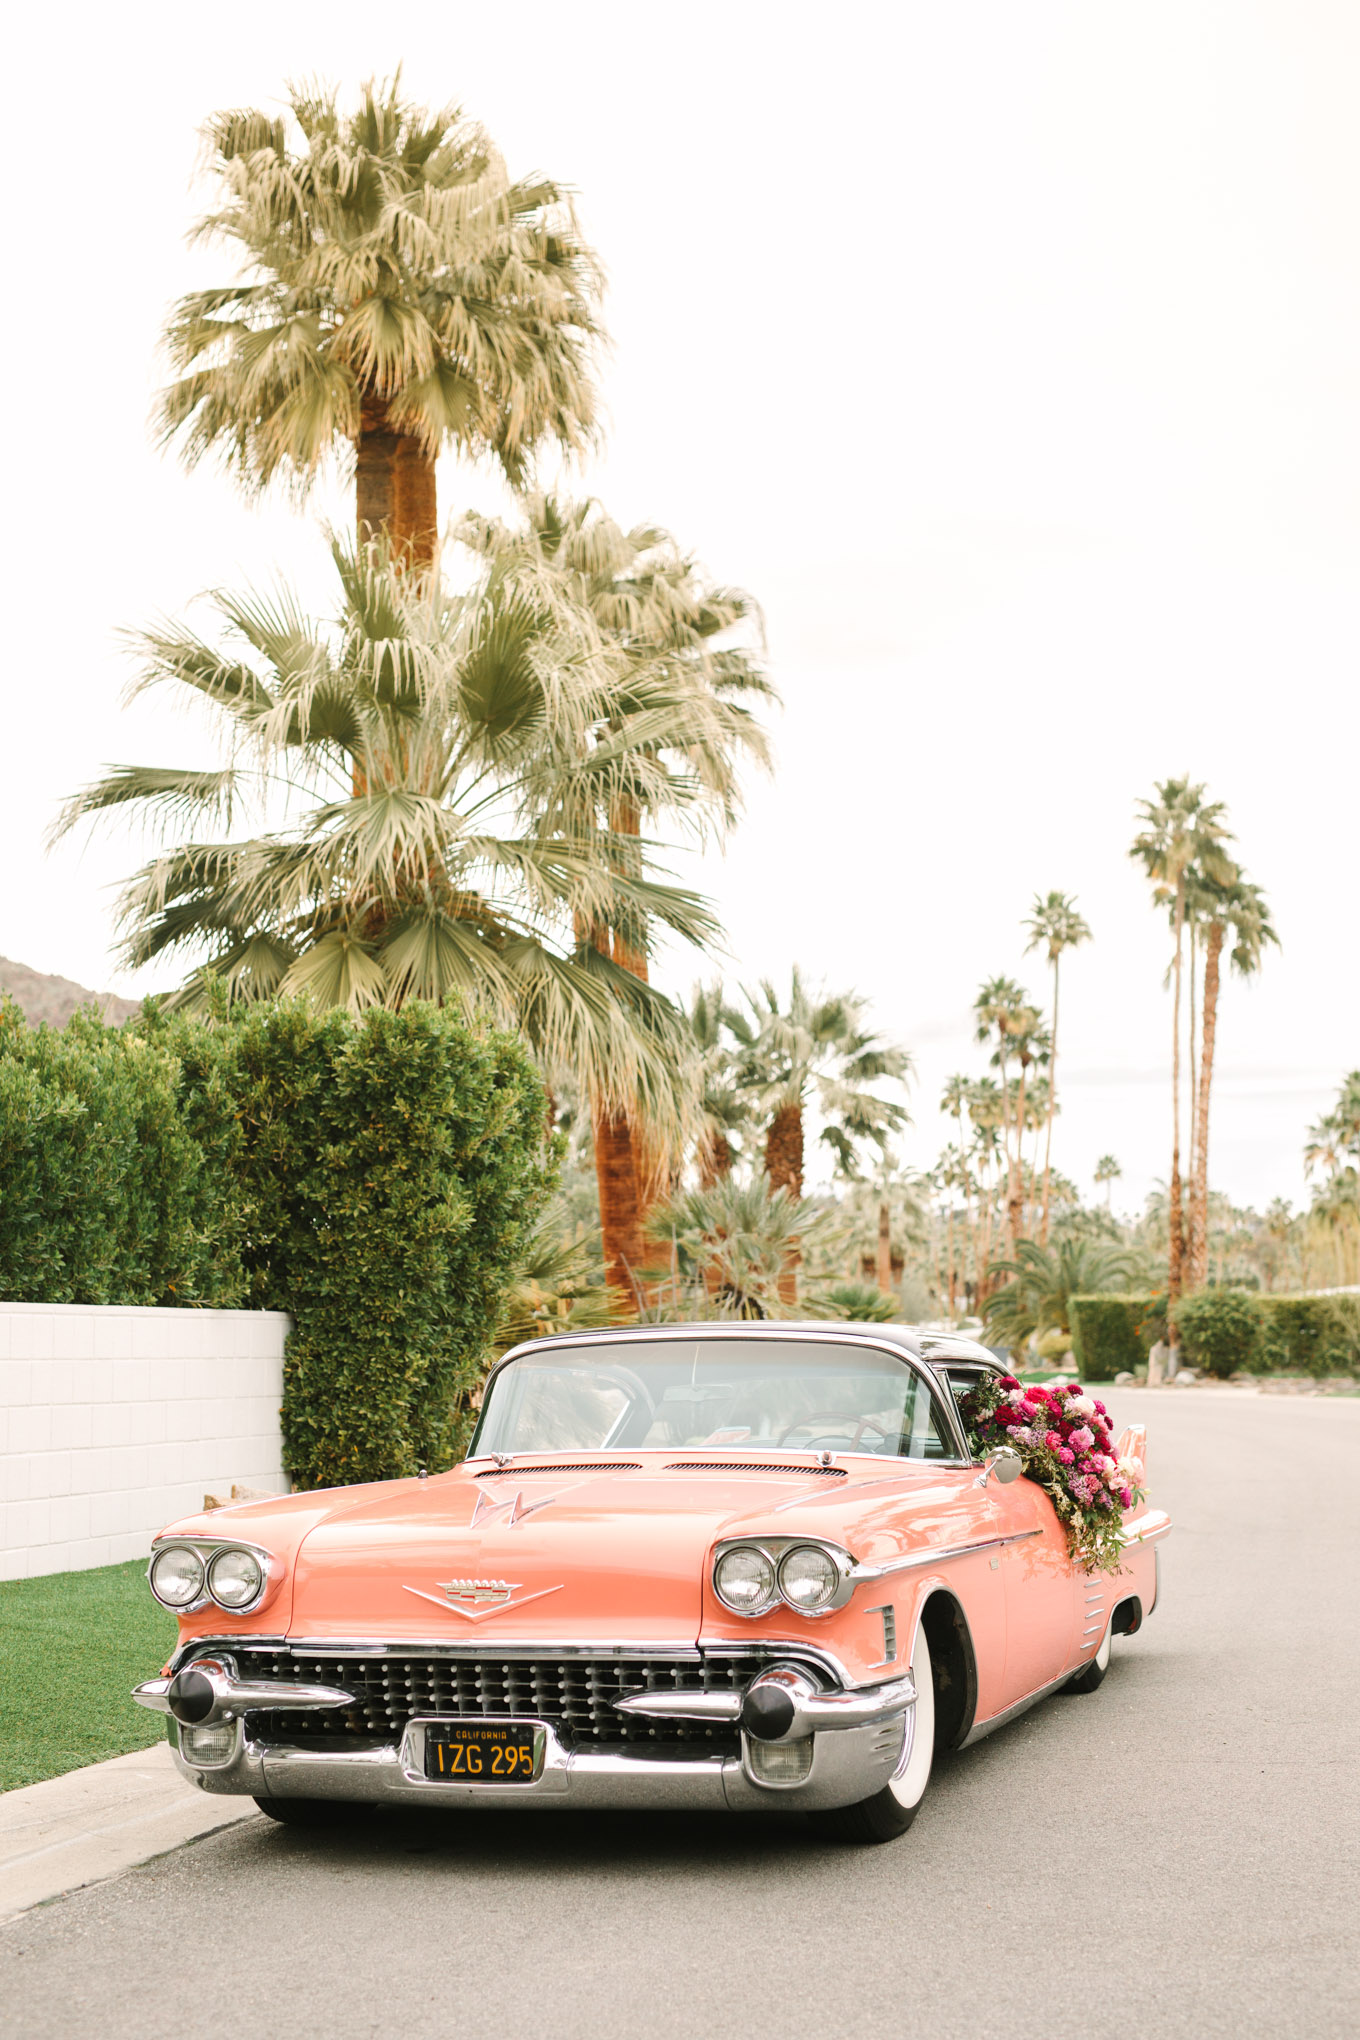 Classic car parked in Mid Century Modern neighborhood. Modern vintage-inspired Palm Springs engagement session with a 1960s pink Cadillac, retro clothing, and flowers by Shindig Chic. | Colorful and elevated wedding inspiration for fun-loving couples in Southern California | #engagementsession #PalmSpringsengagement #vintageweddingdress #floralcar #pinkcar   Source: Mary Costa Photography | Los Angeles